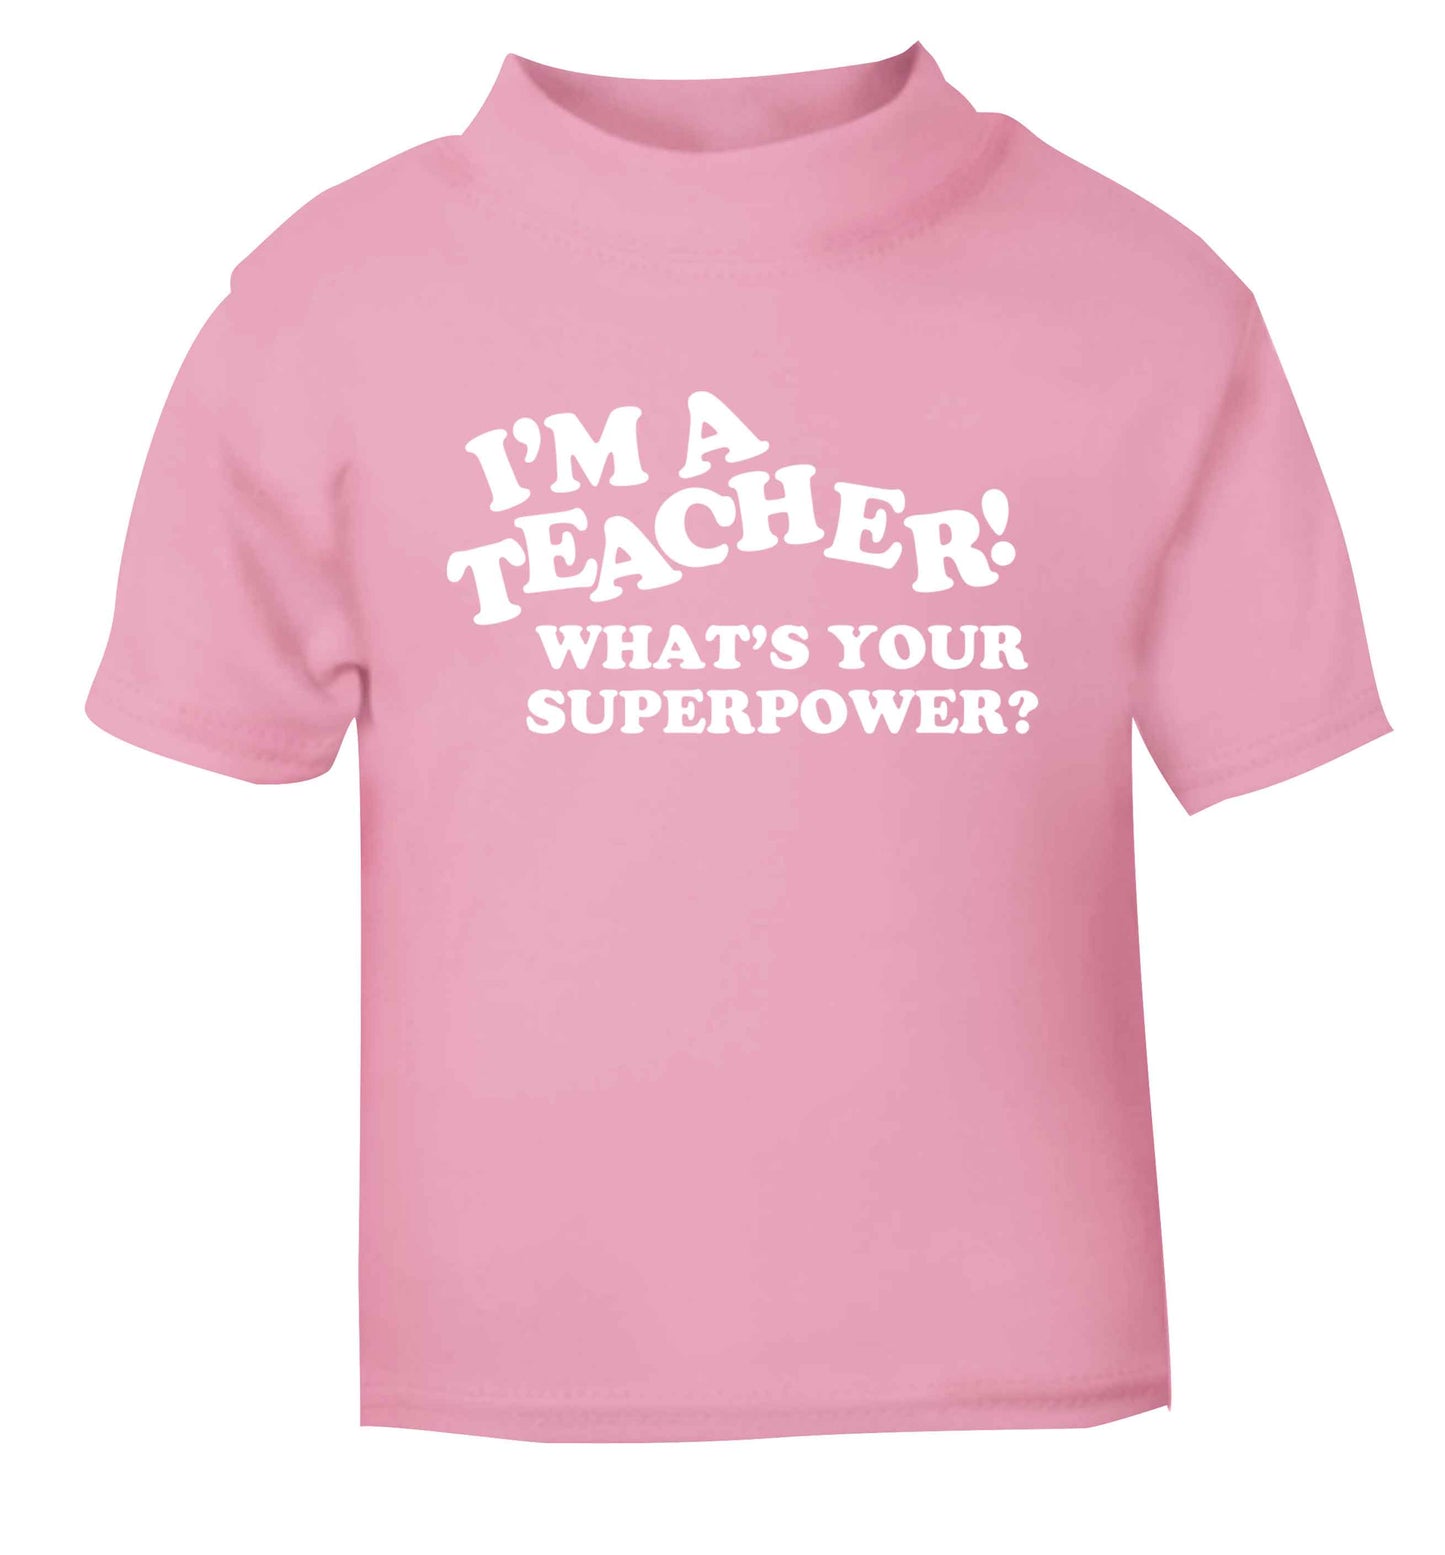 I'm a teacher what's your superpower?! light pink baby toddler Tshirt 2 Years